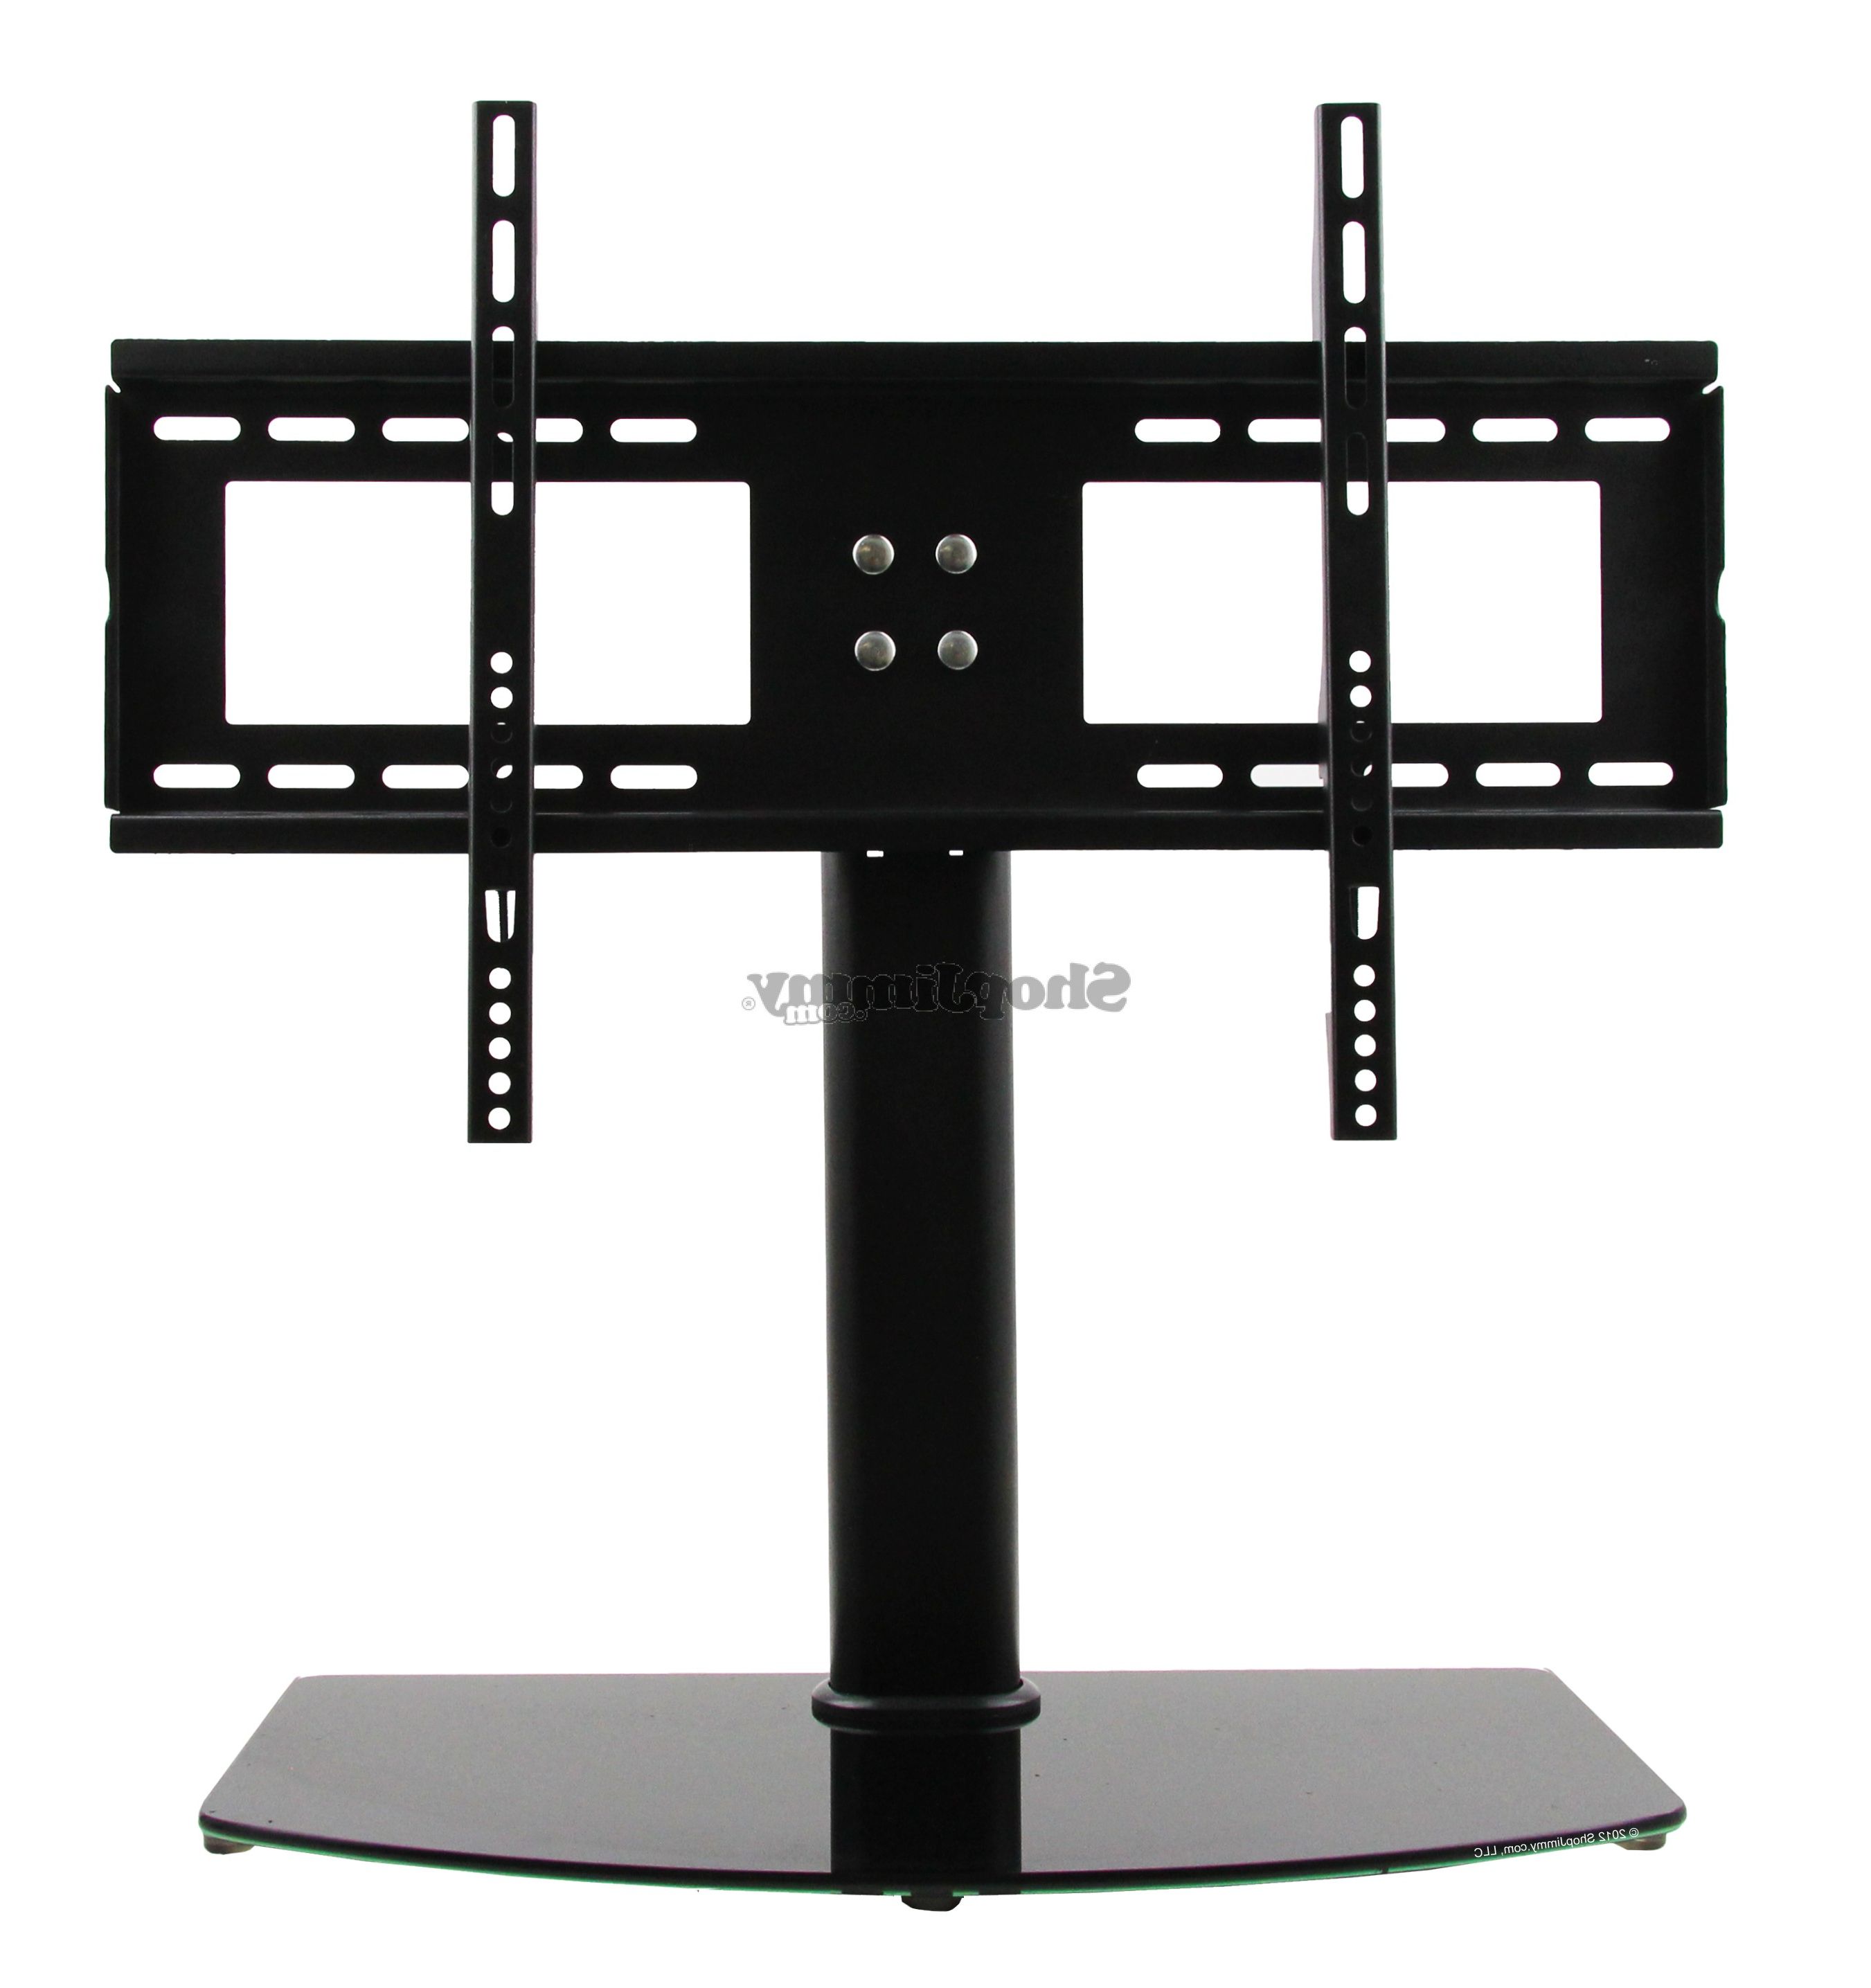 Tabletop Tv Stands Throughout Most Up To Date Universal Tv Stand/base + Wall Mount For 37" 55" Flat Screen Tvs (View 9 of 20)